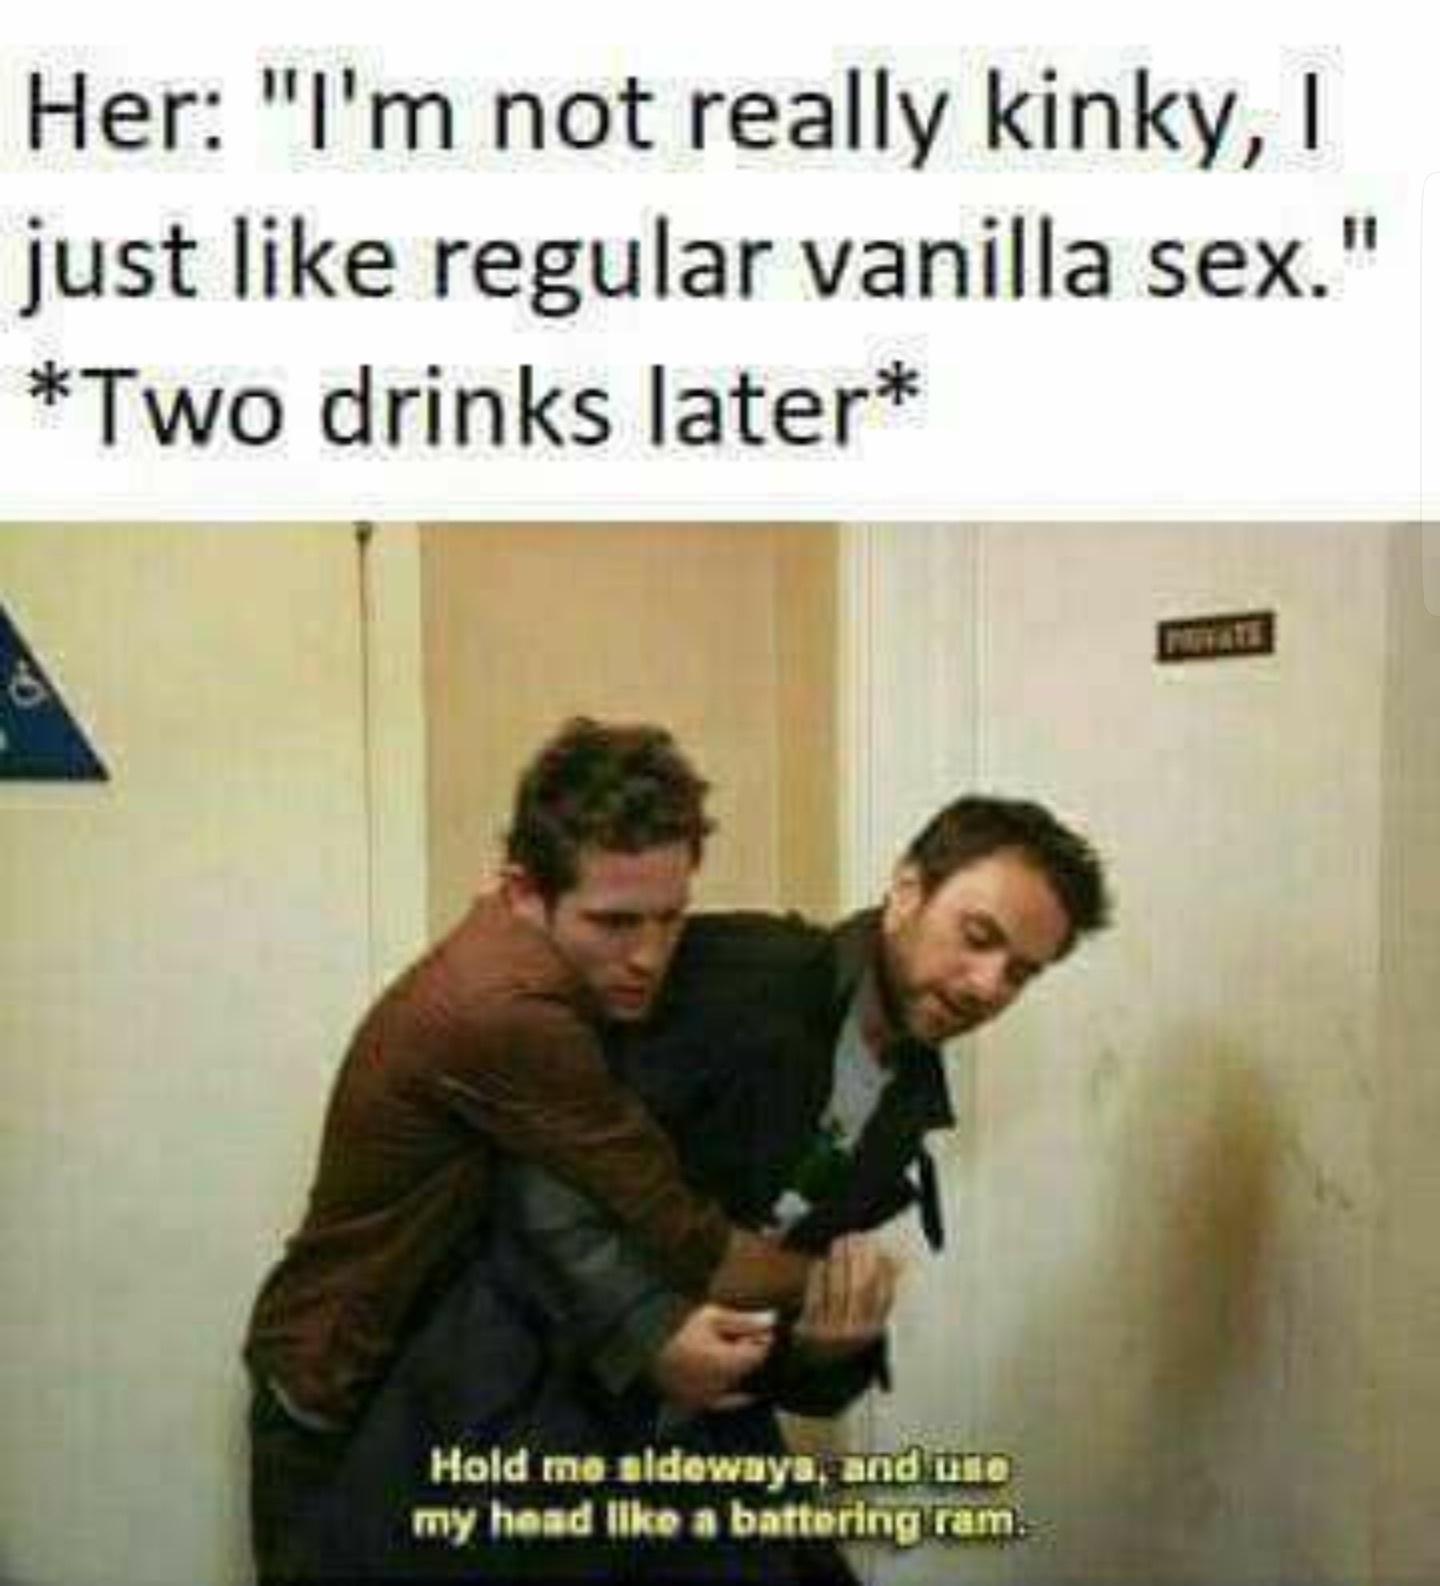 funny memes - dank memes - vanilla sex life meme - Her "I'm not really kinky, I just regular vanilla sex." Two drinks later d Hold me sideways, and use my head a battering ram.